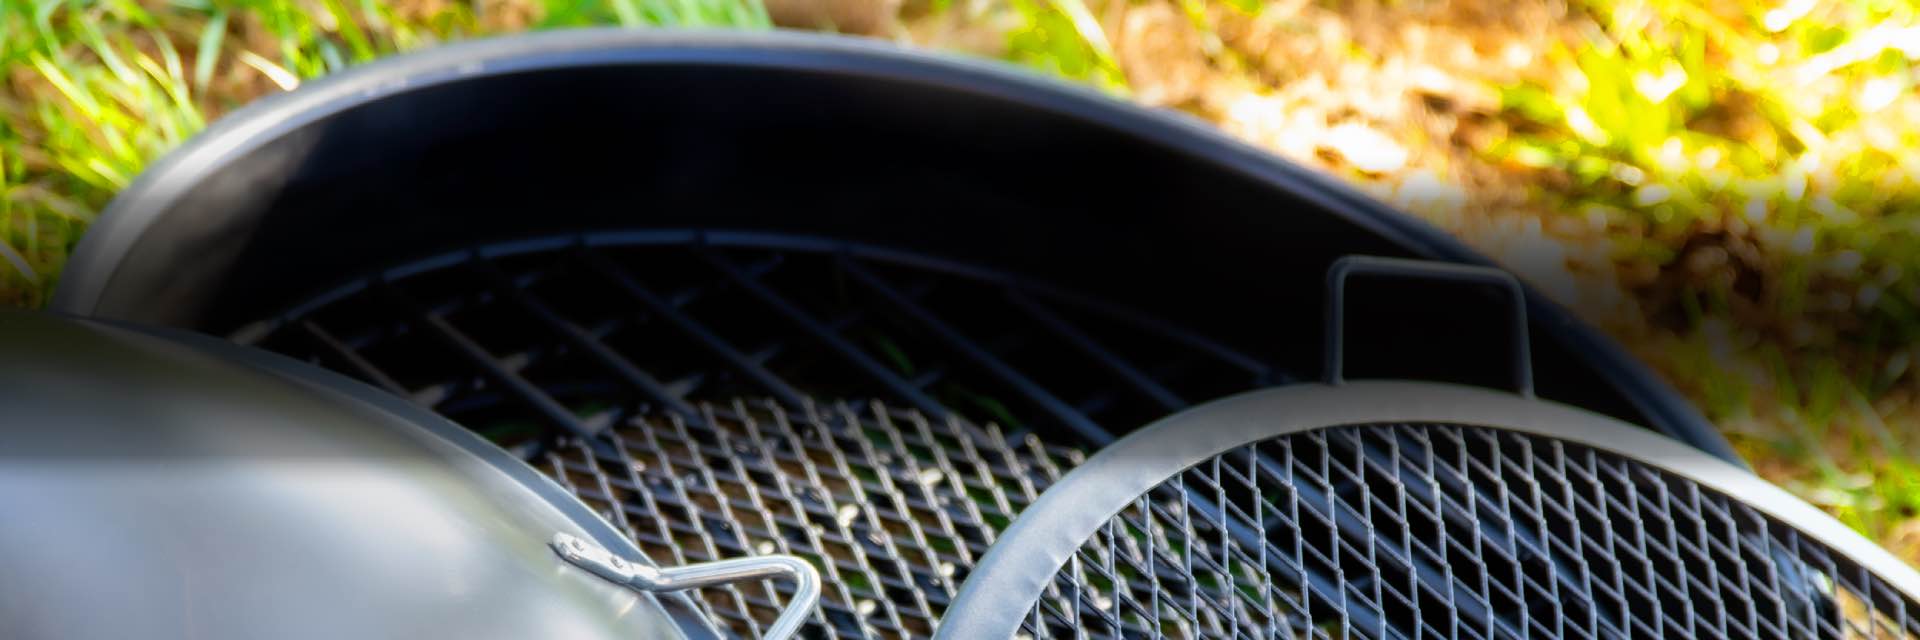 Fire pit grate and BBQ grilling grate inside a fire ring and a firepit cover